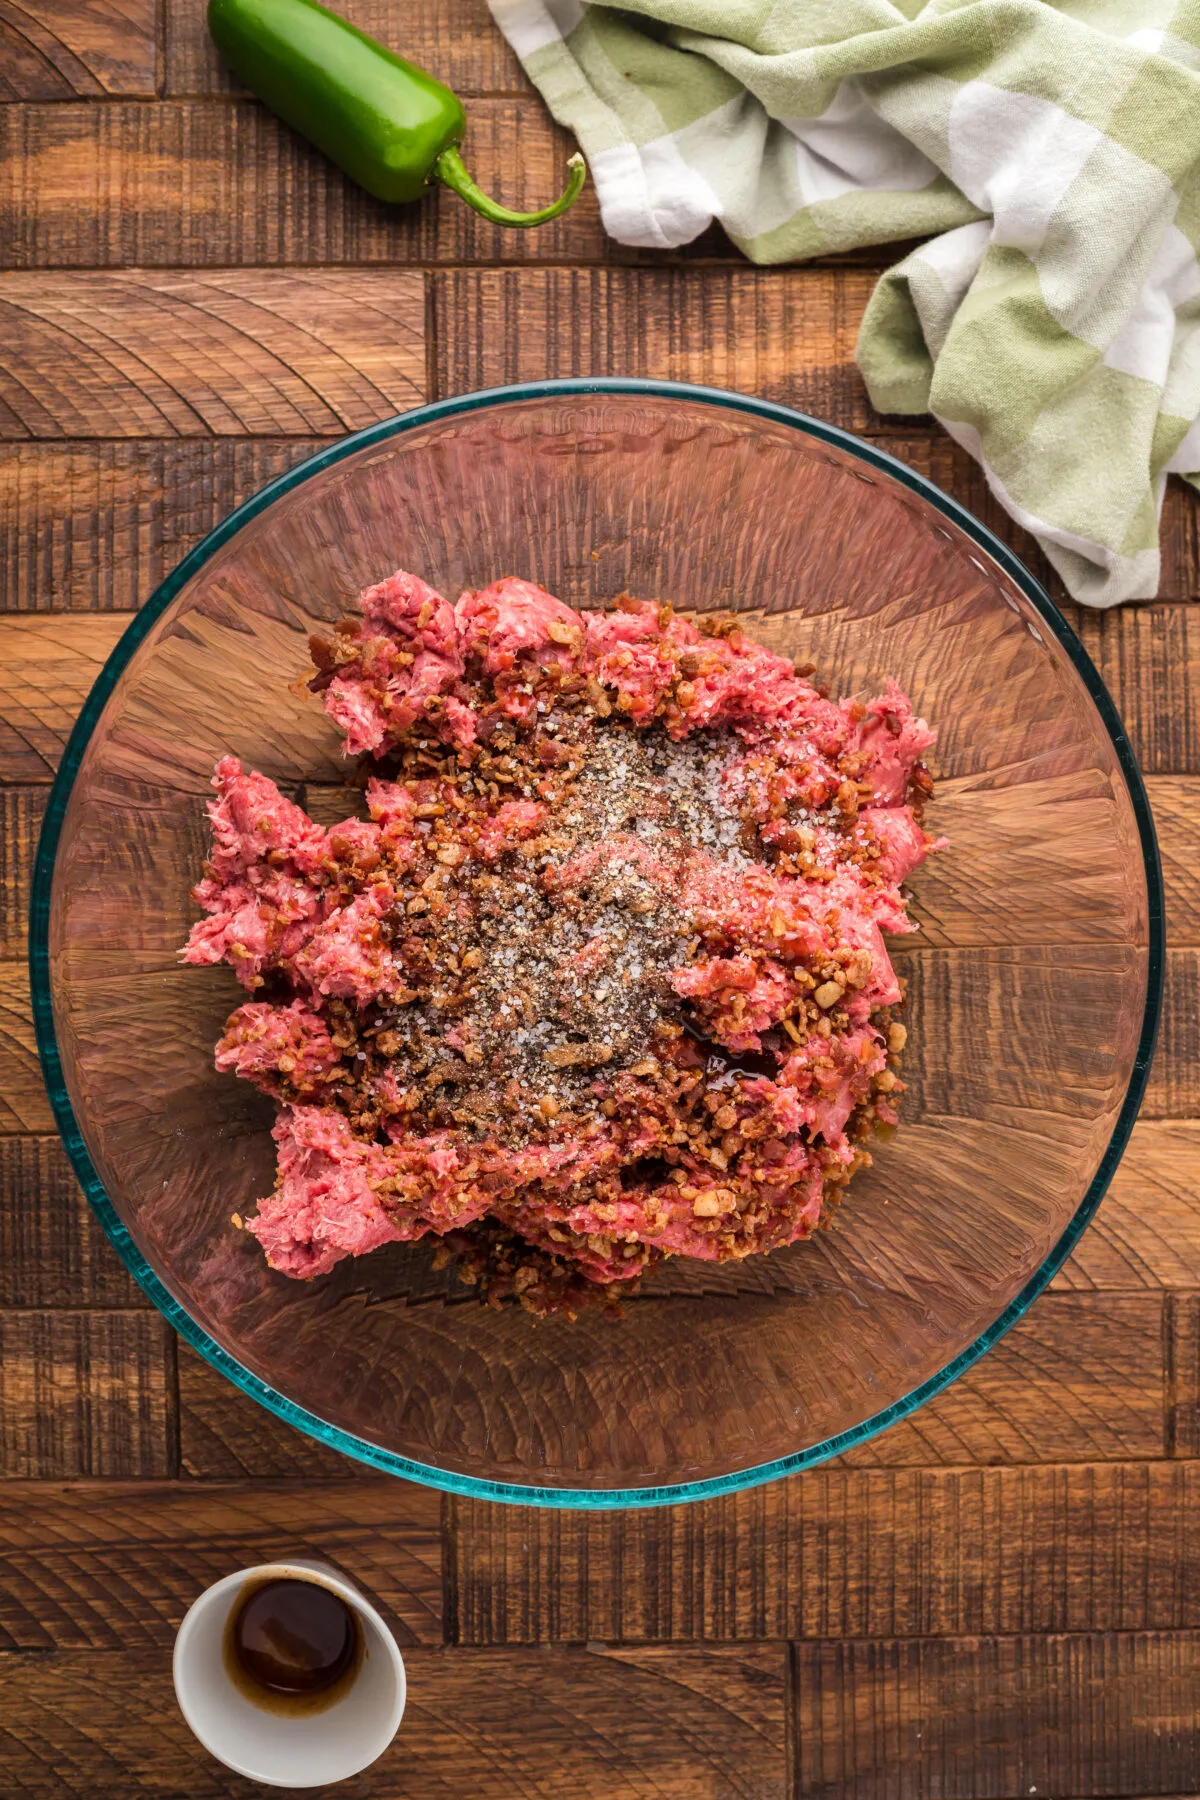 Ground beef and seasonings in a bowl.